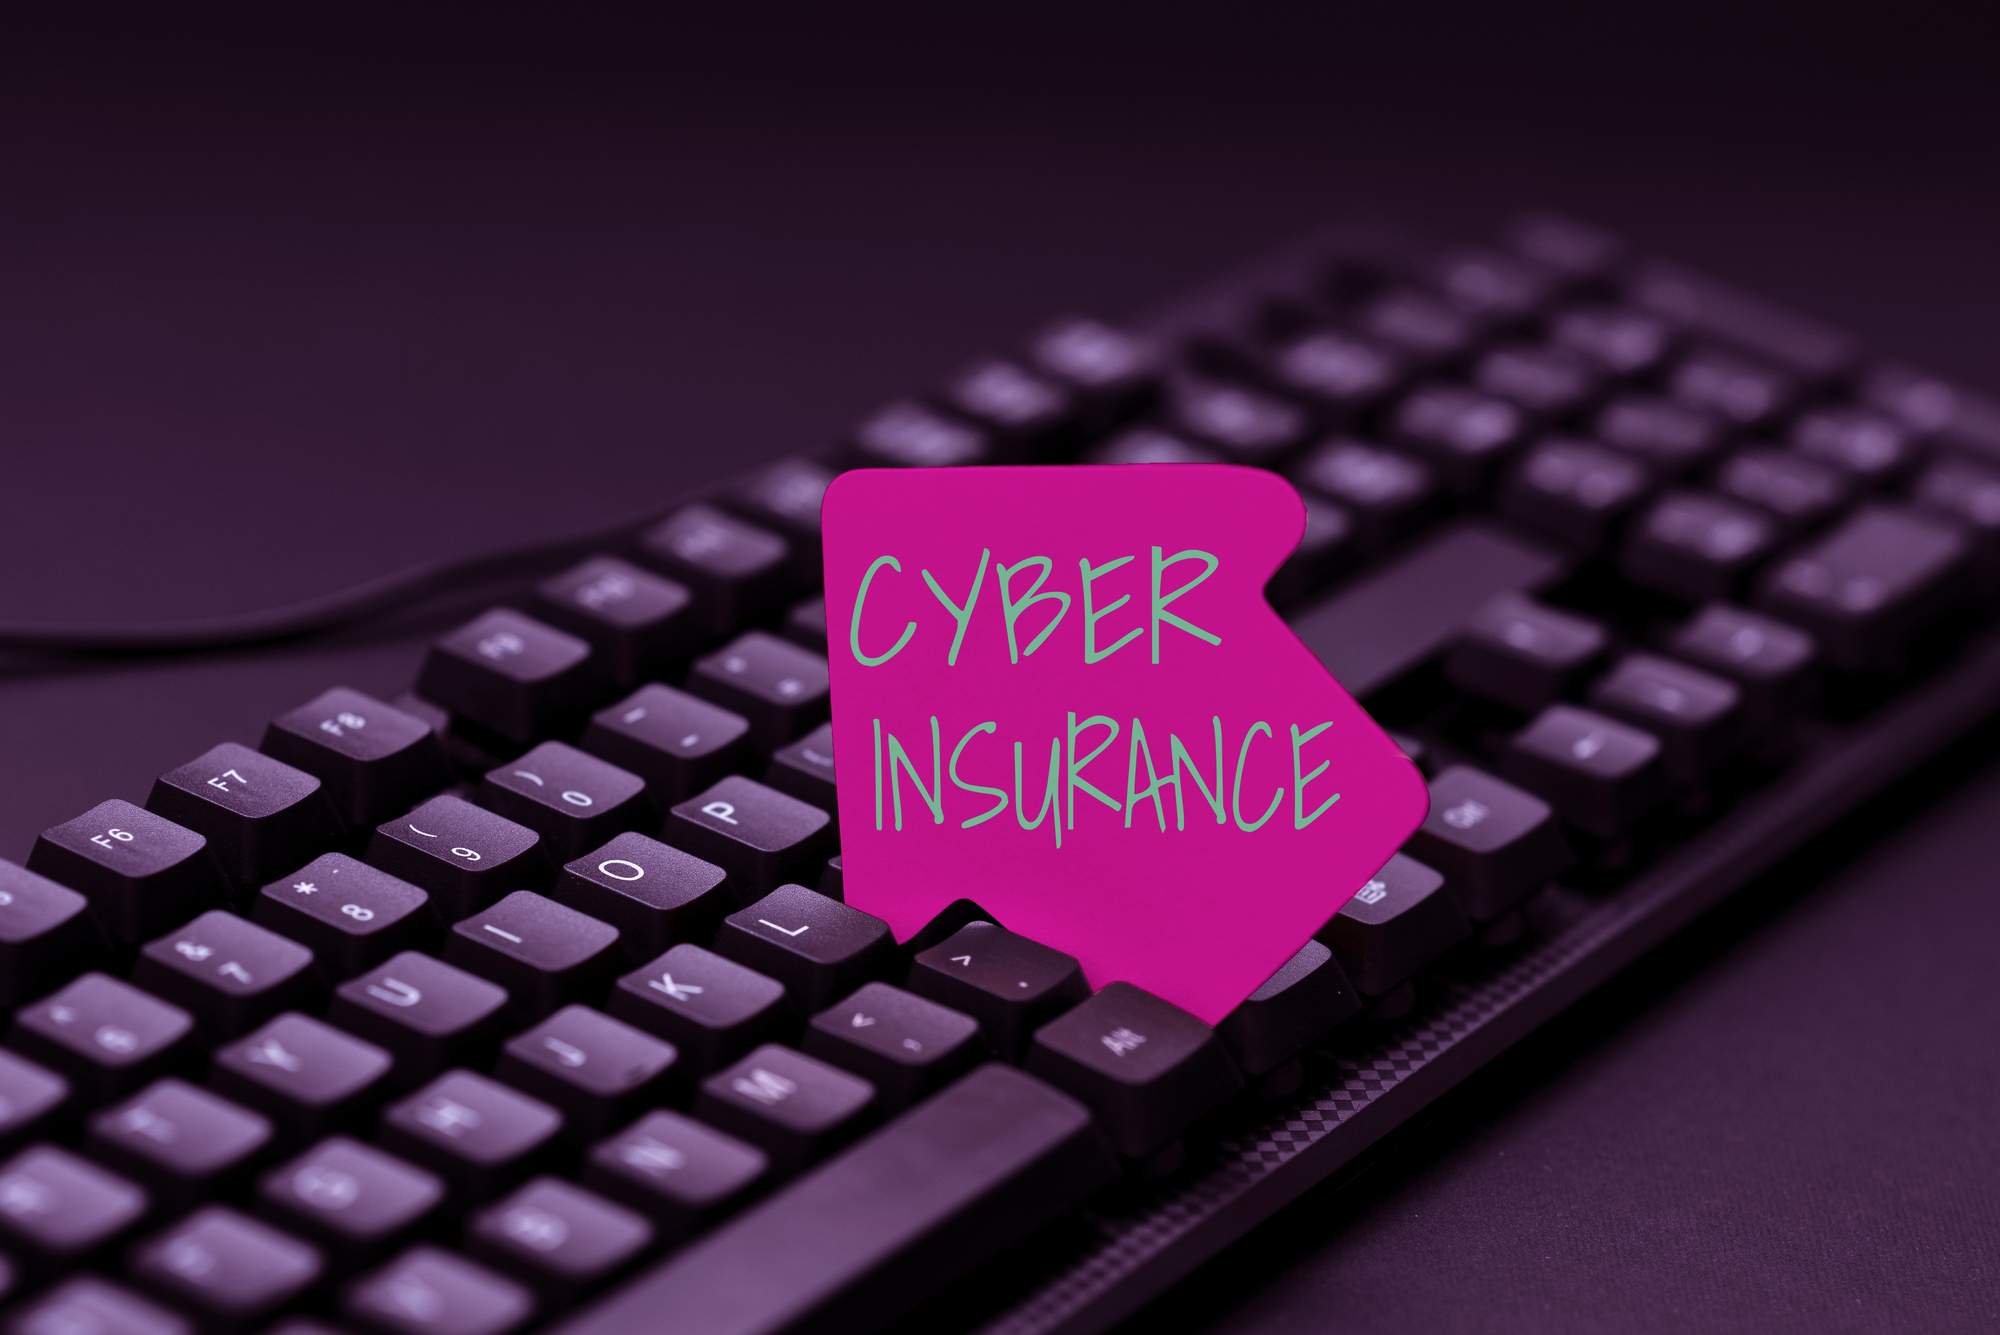 cyberinsurance premiums are on the rise